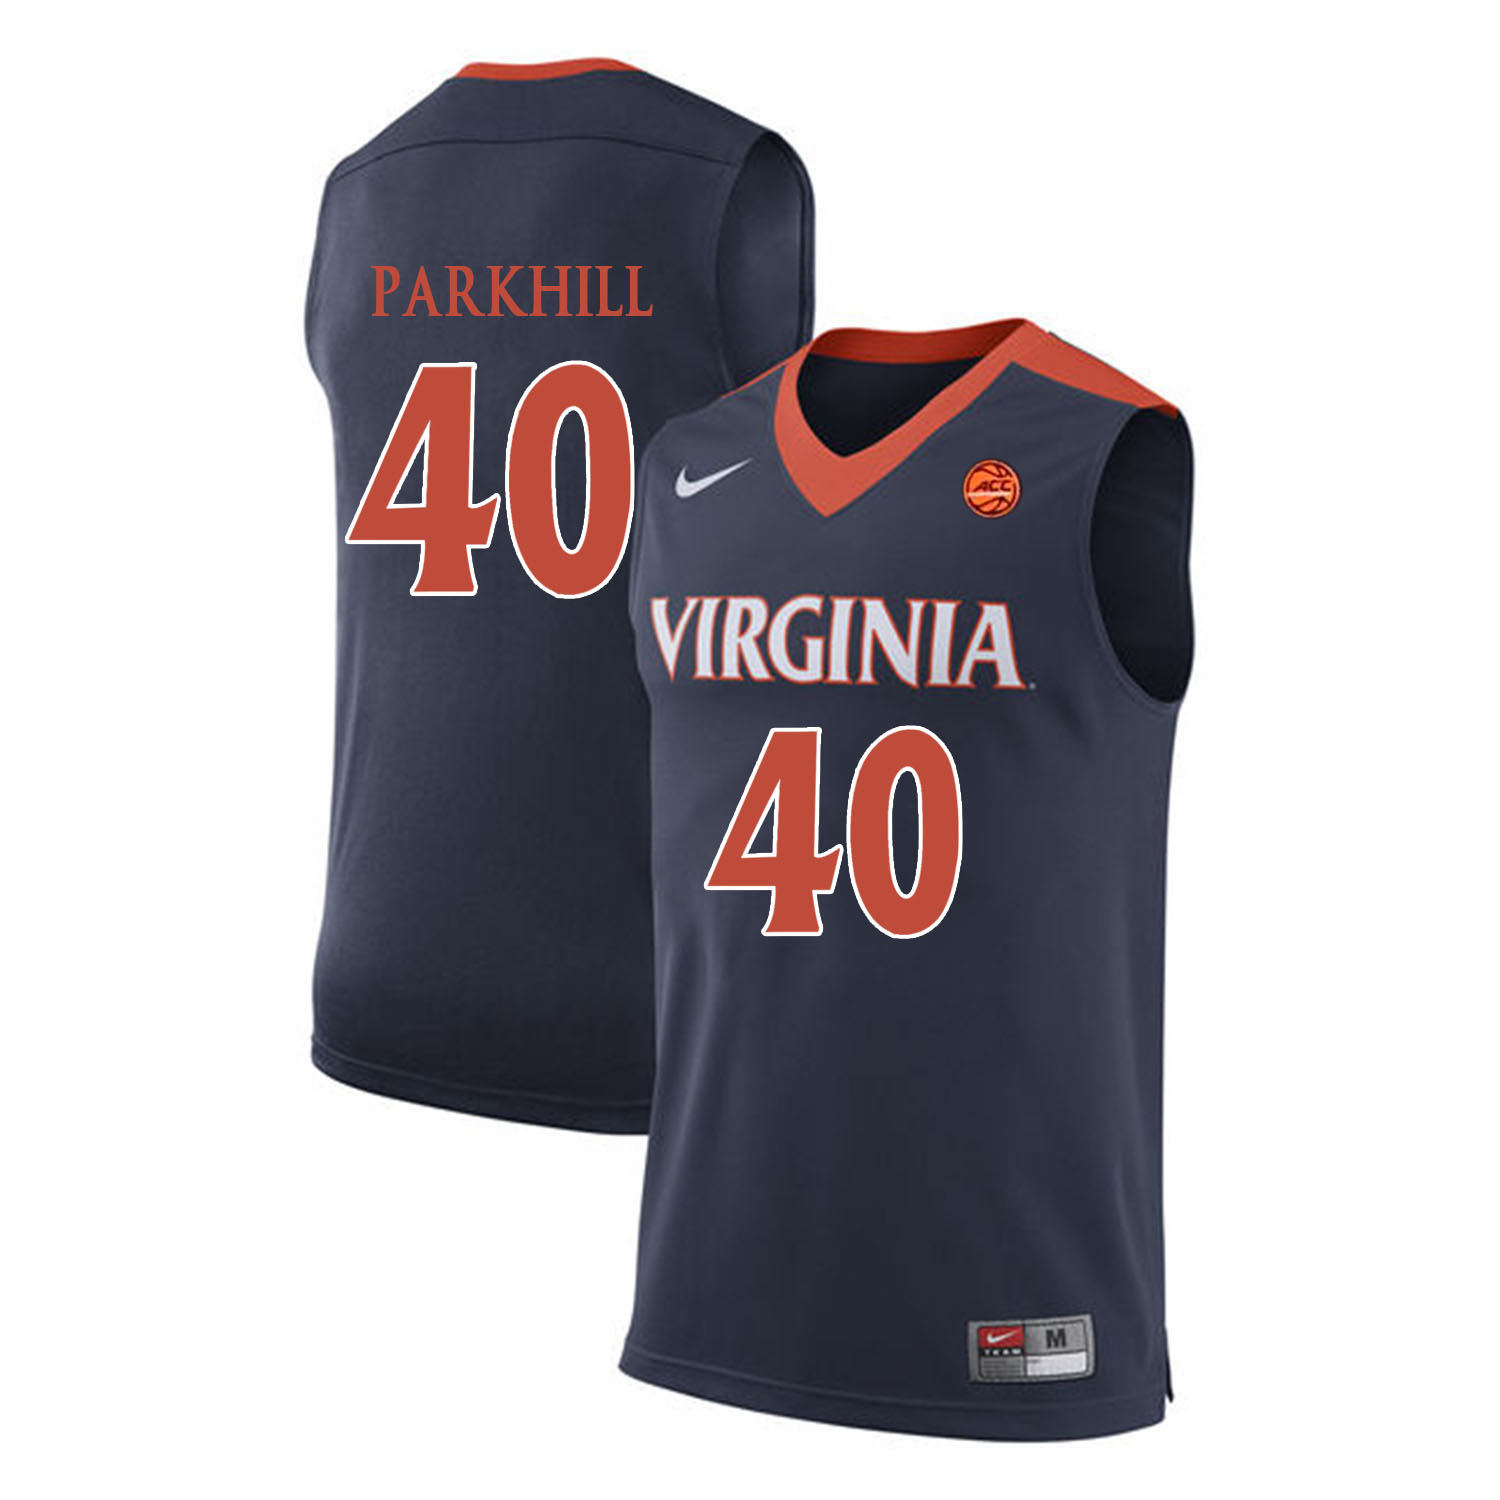 Virginia Cavaliers 40 Barry Parkhill Navy College Basketball Jersey